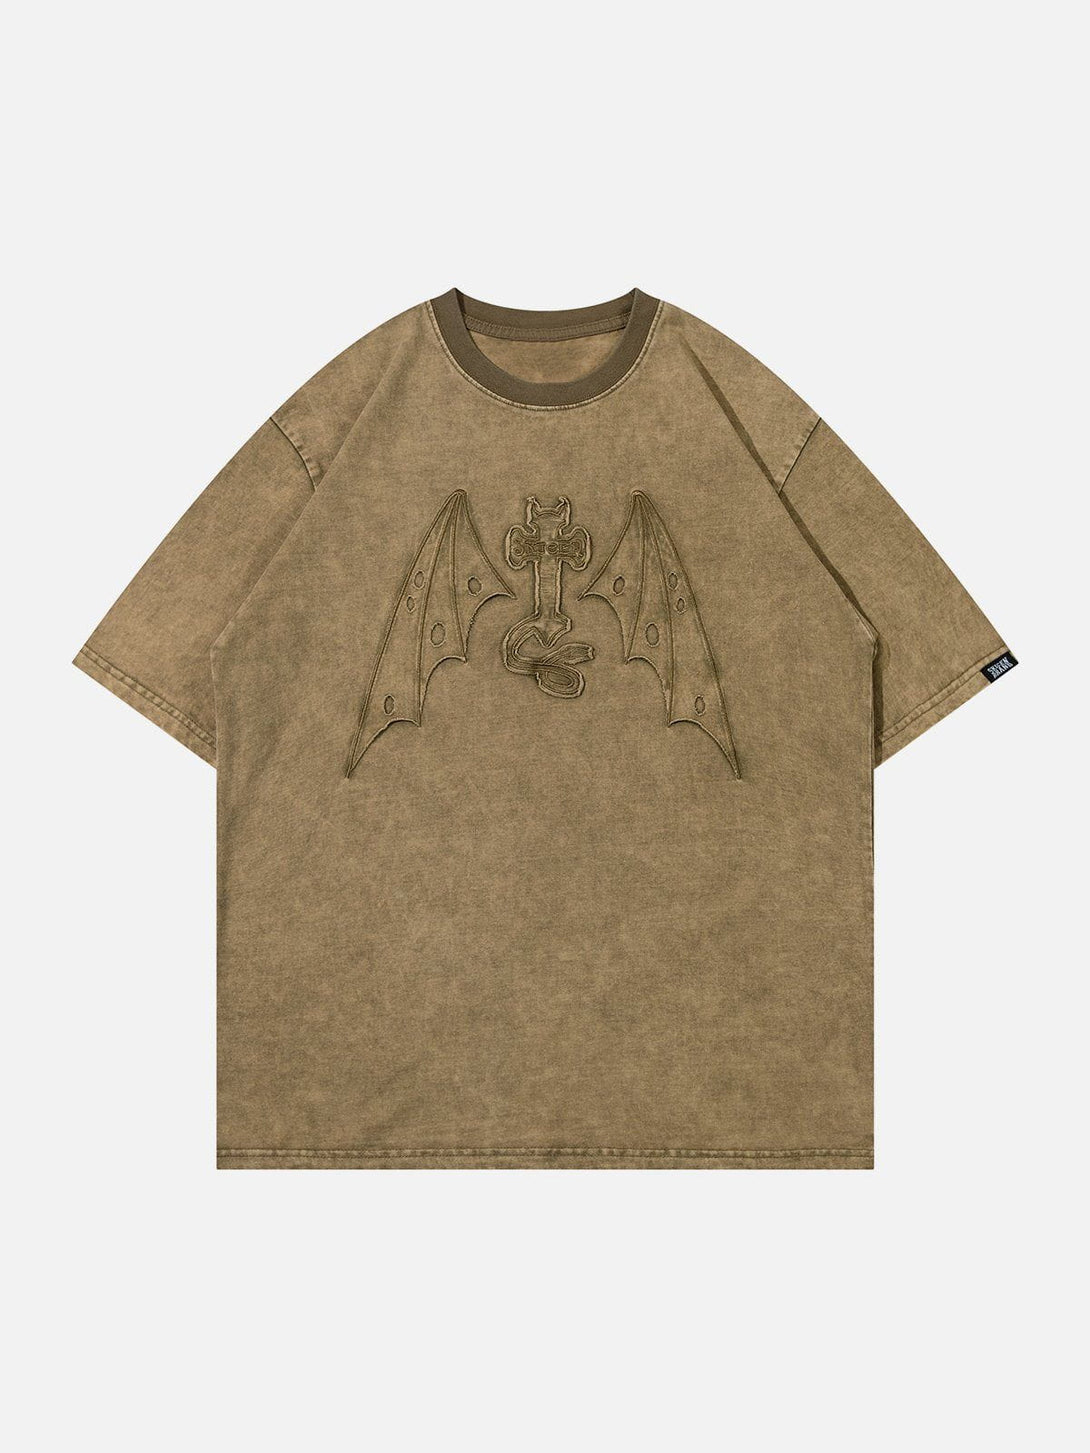 Ellesey - Applique Embroidery Devil Element Washed Tee- Streetwear Fashion - ellesey.com